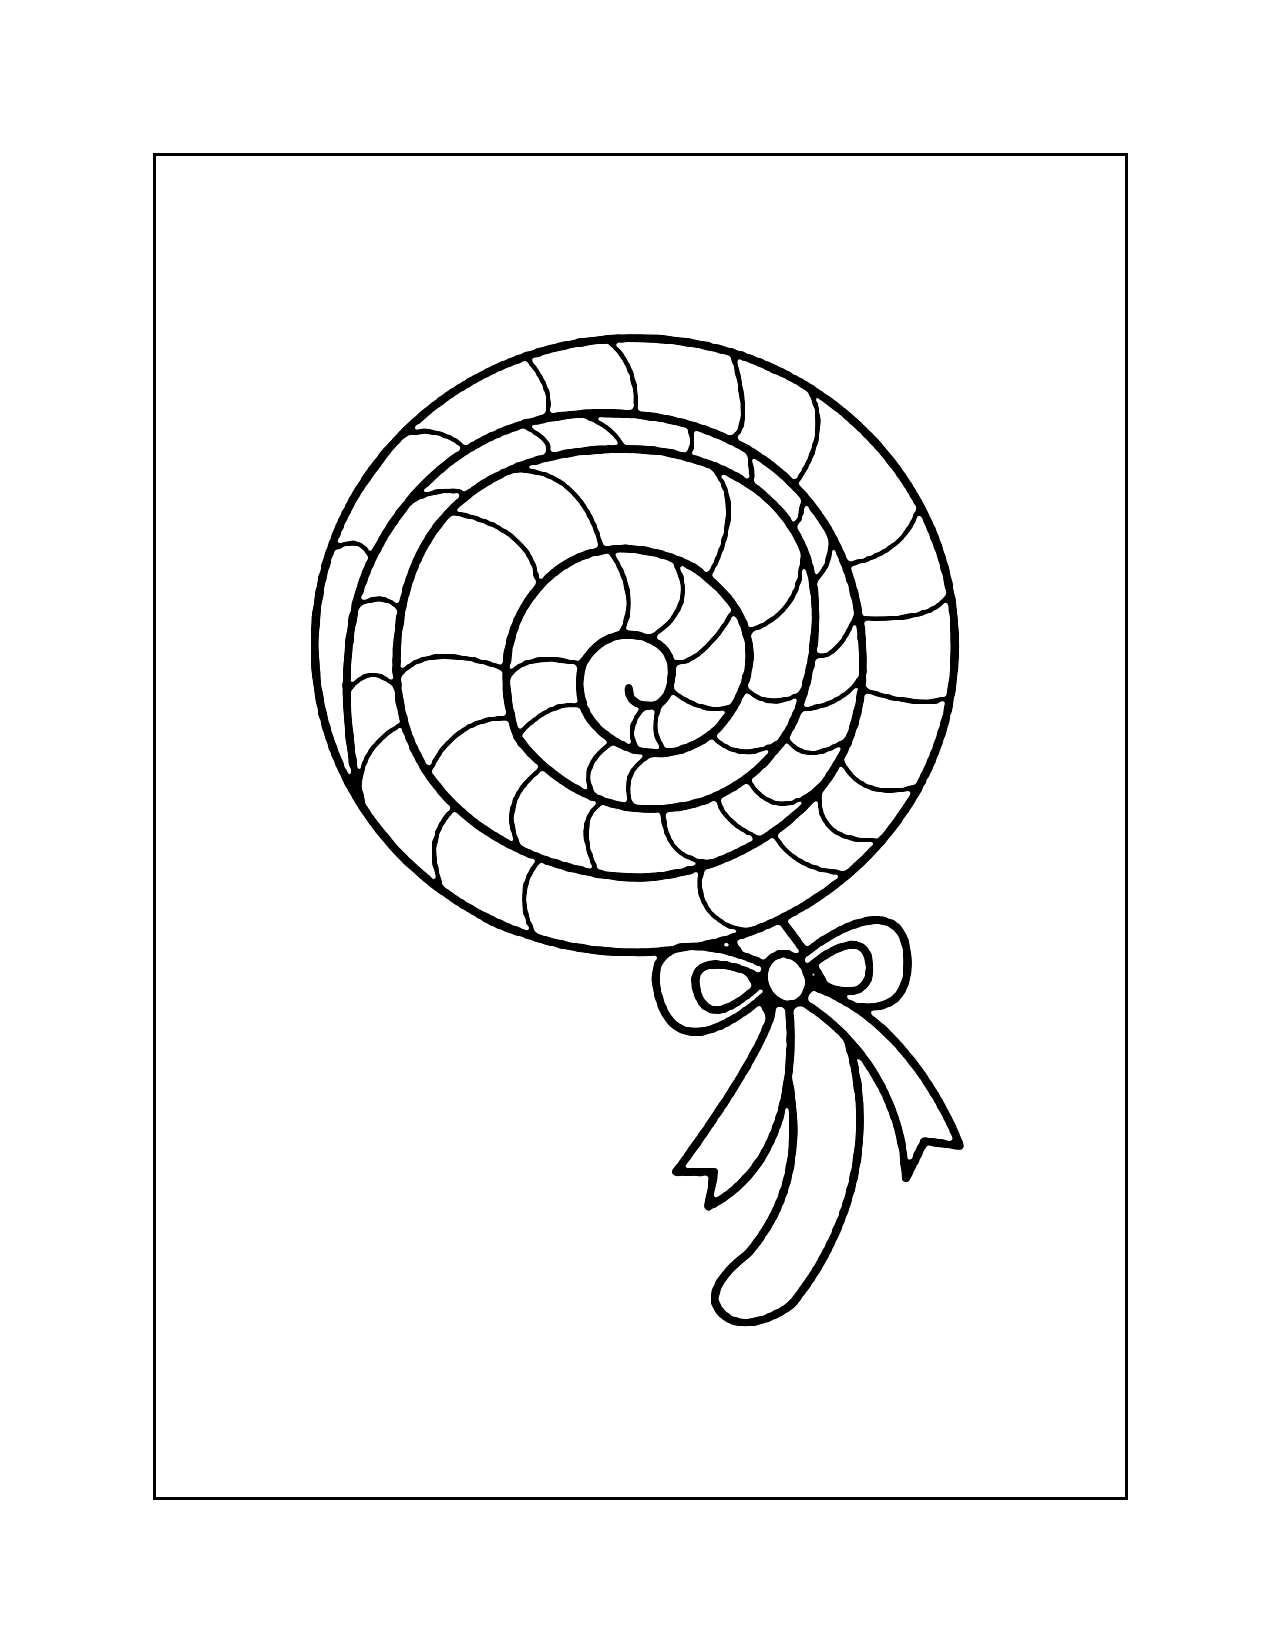 Swirly Lollipop With Bow Coloring Page